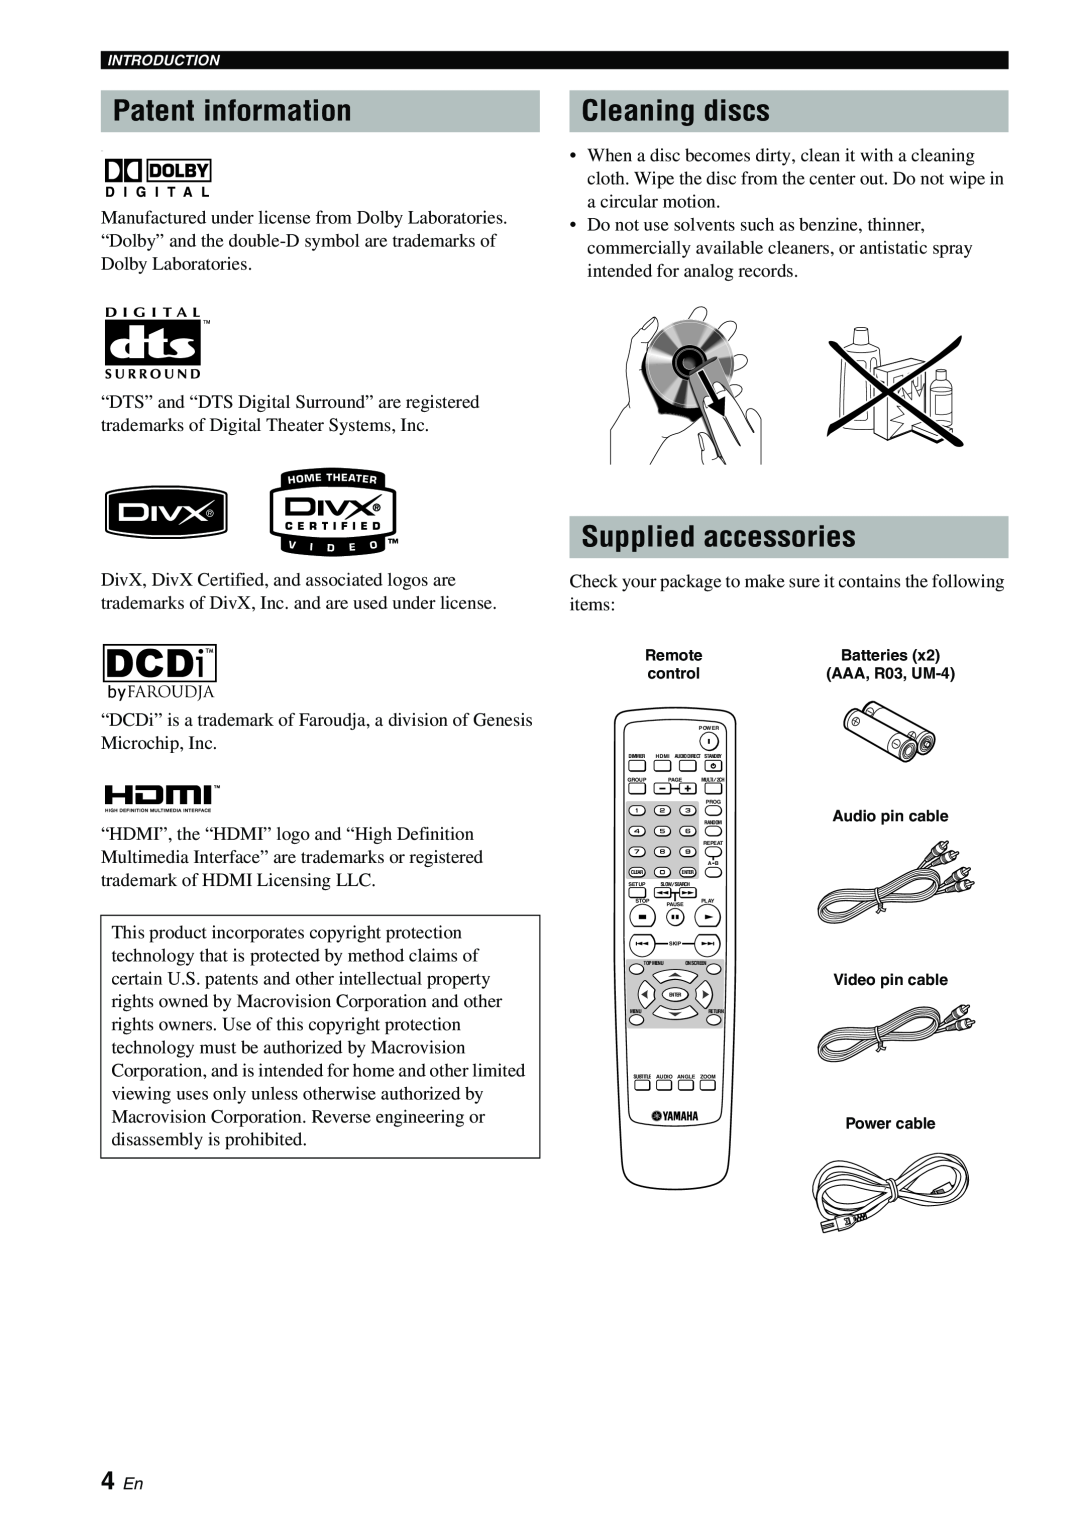 Yamaha DVD-S1700B manual Patent information, Cleaning discs, Supplied accessories, 4 En 